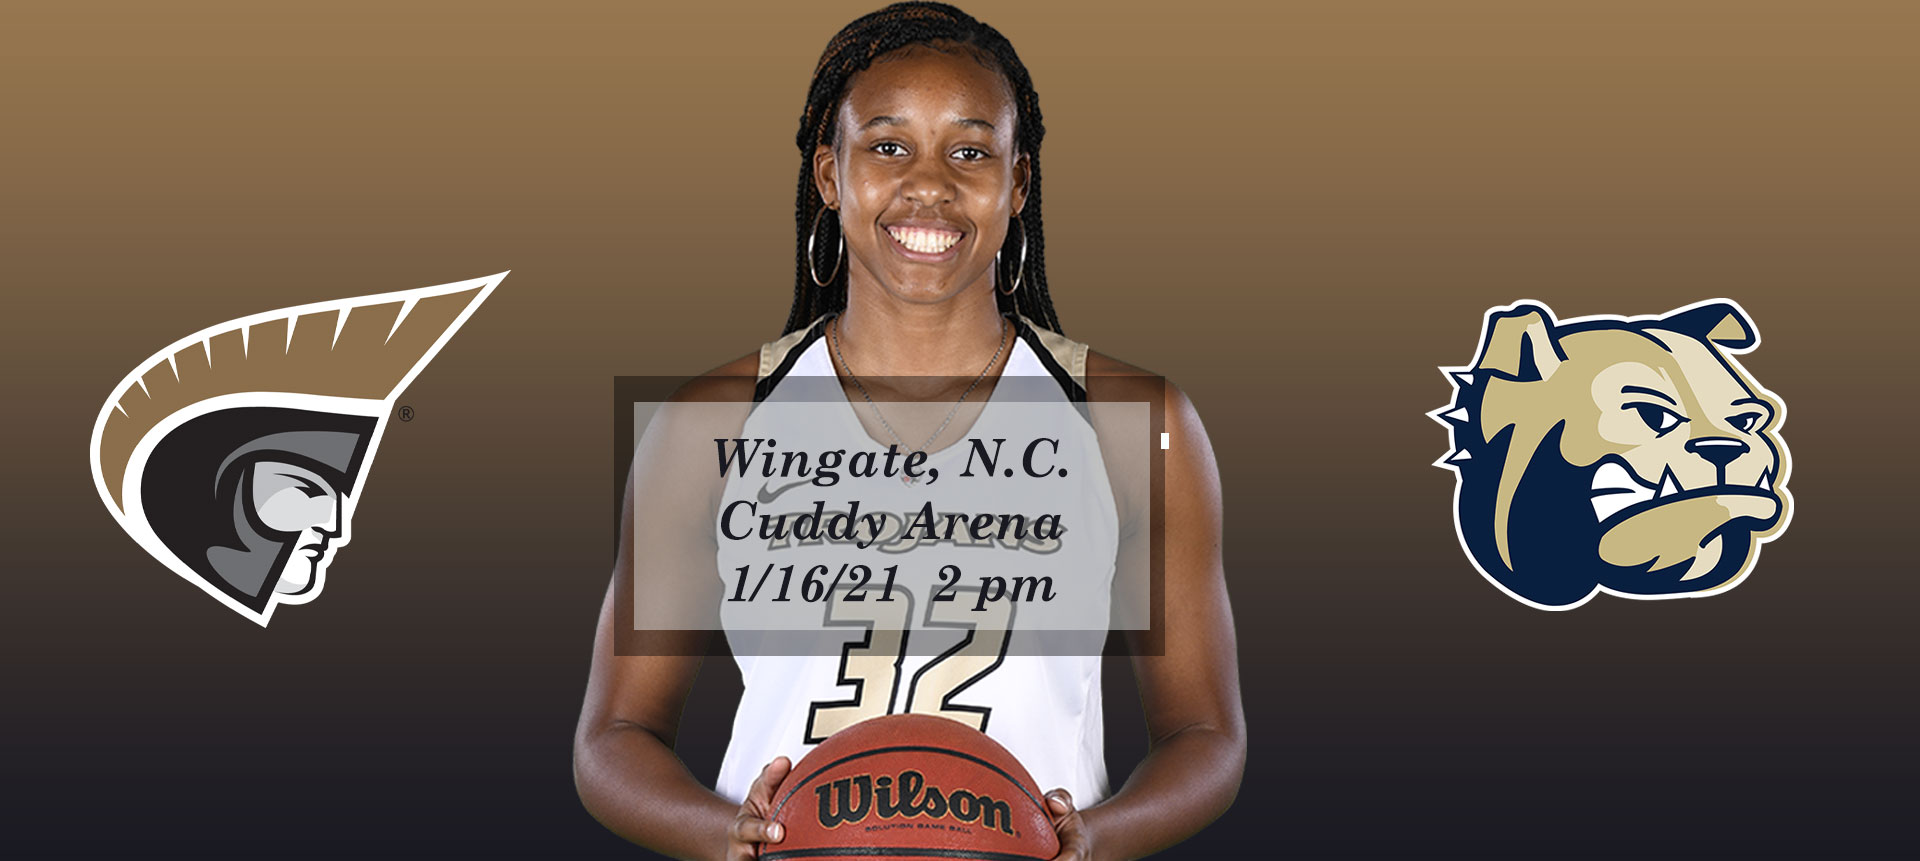 Women’s Basketball Game Notes Released for Wingate